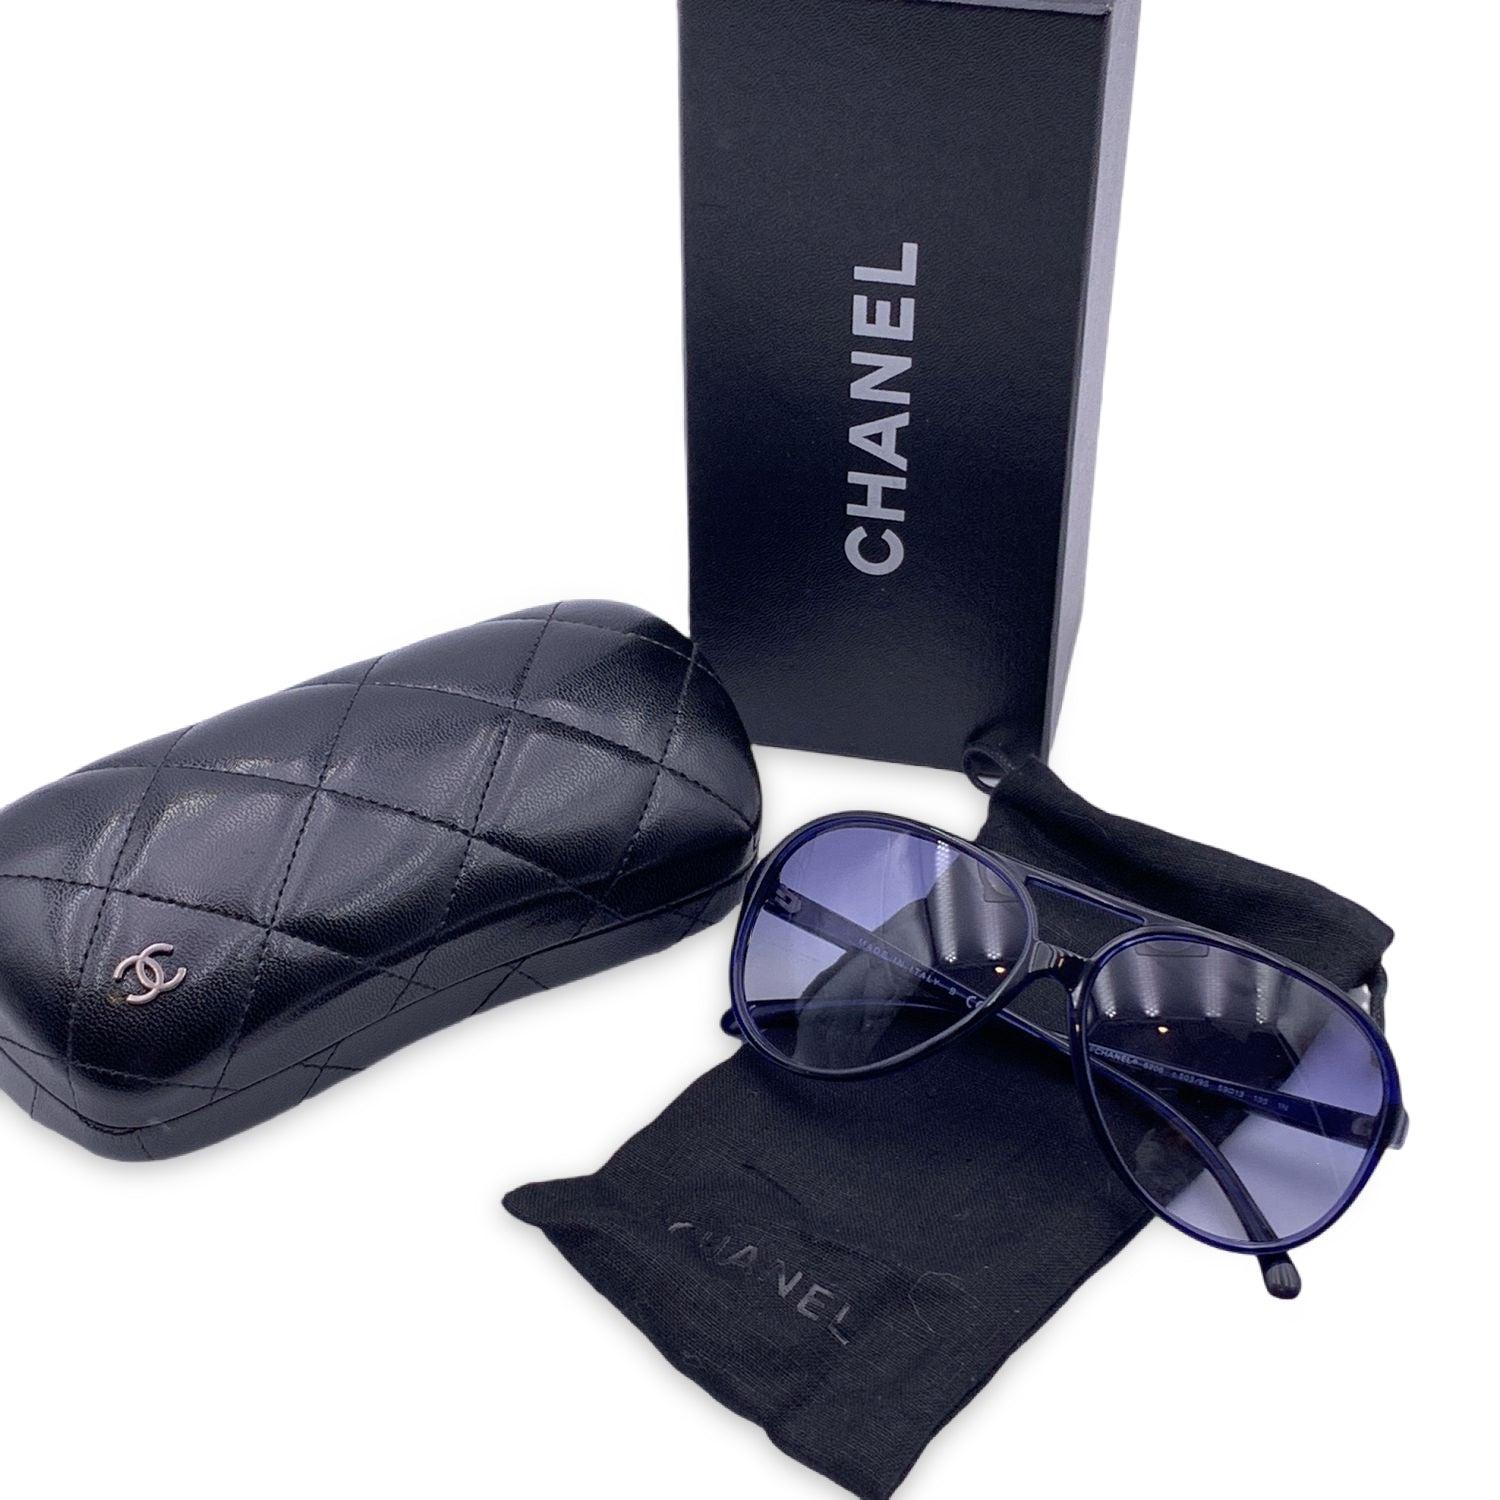 Blue acetate Aviator sunglasses by Chanel. Model: 5206 - c.503/9S. 100% Total UVA/UVB protection gradient blue lenses. Made in Italy Details MATERIAL: Plastic COLOR: Blue MODEL: 5206 GENDER: Unisex Adults COUNTRY OF MANUFACTURE: Italy ORIGINAL